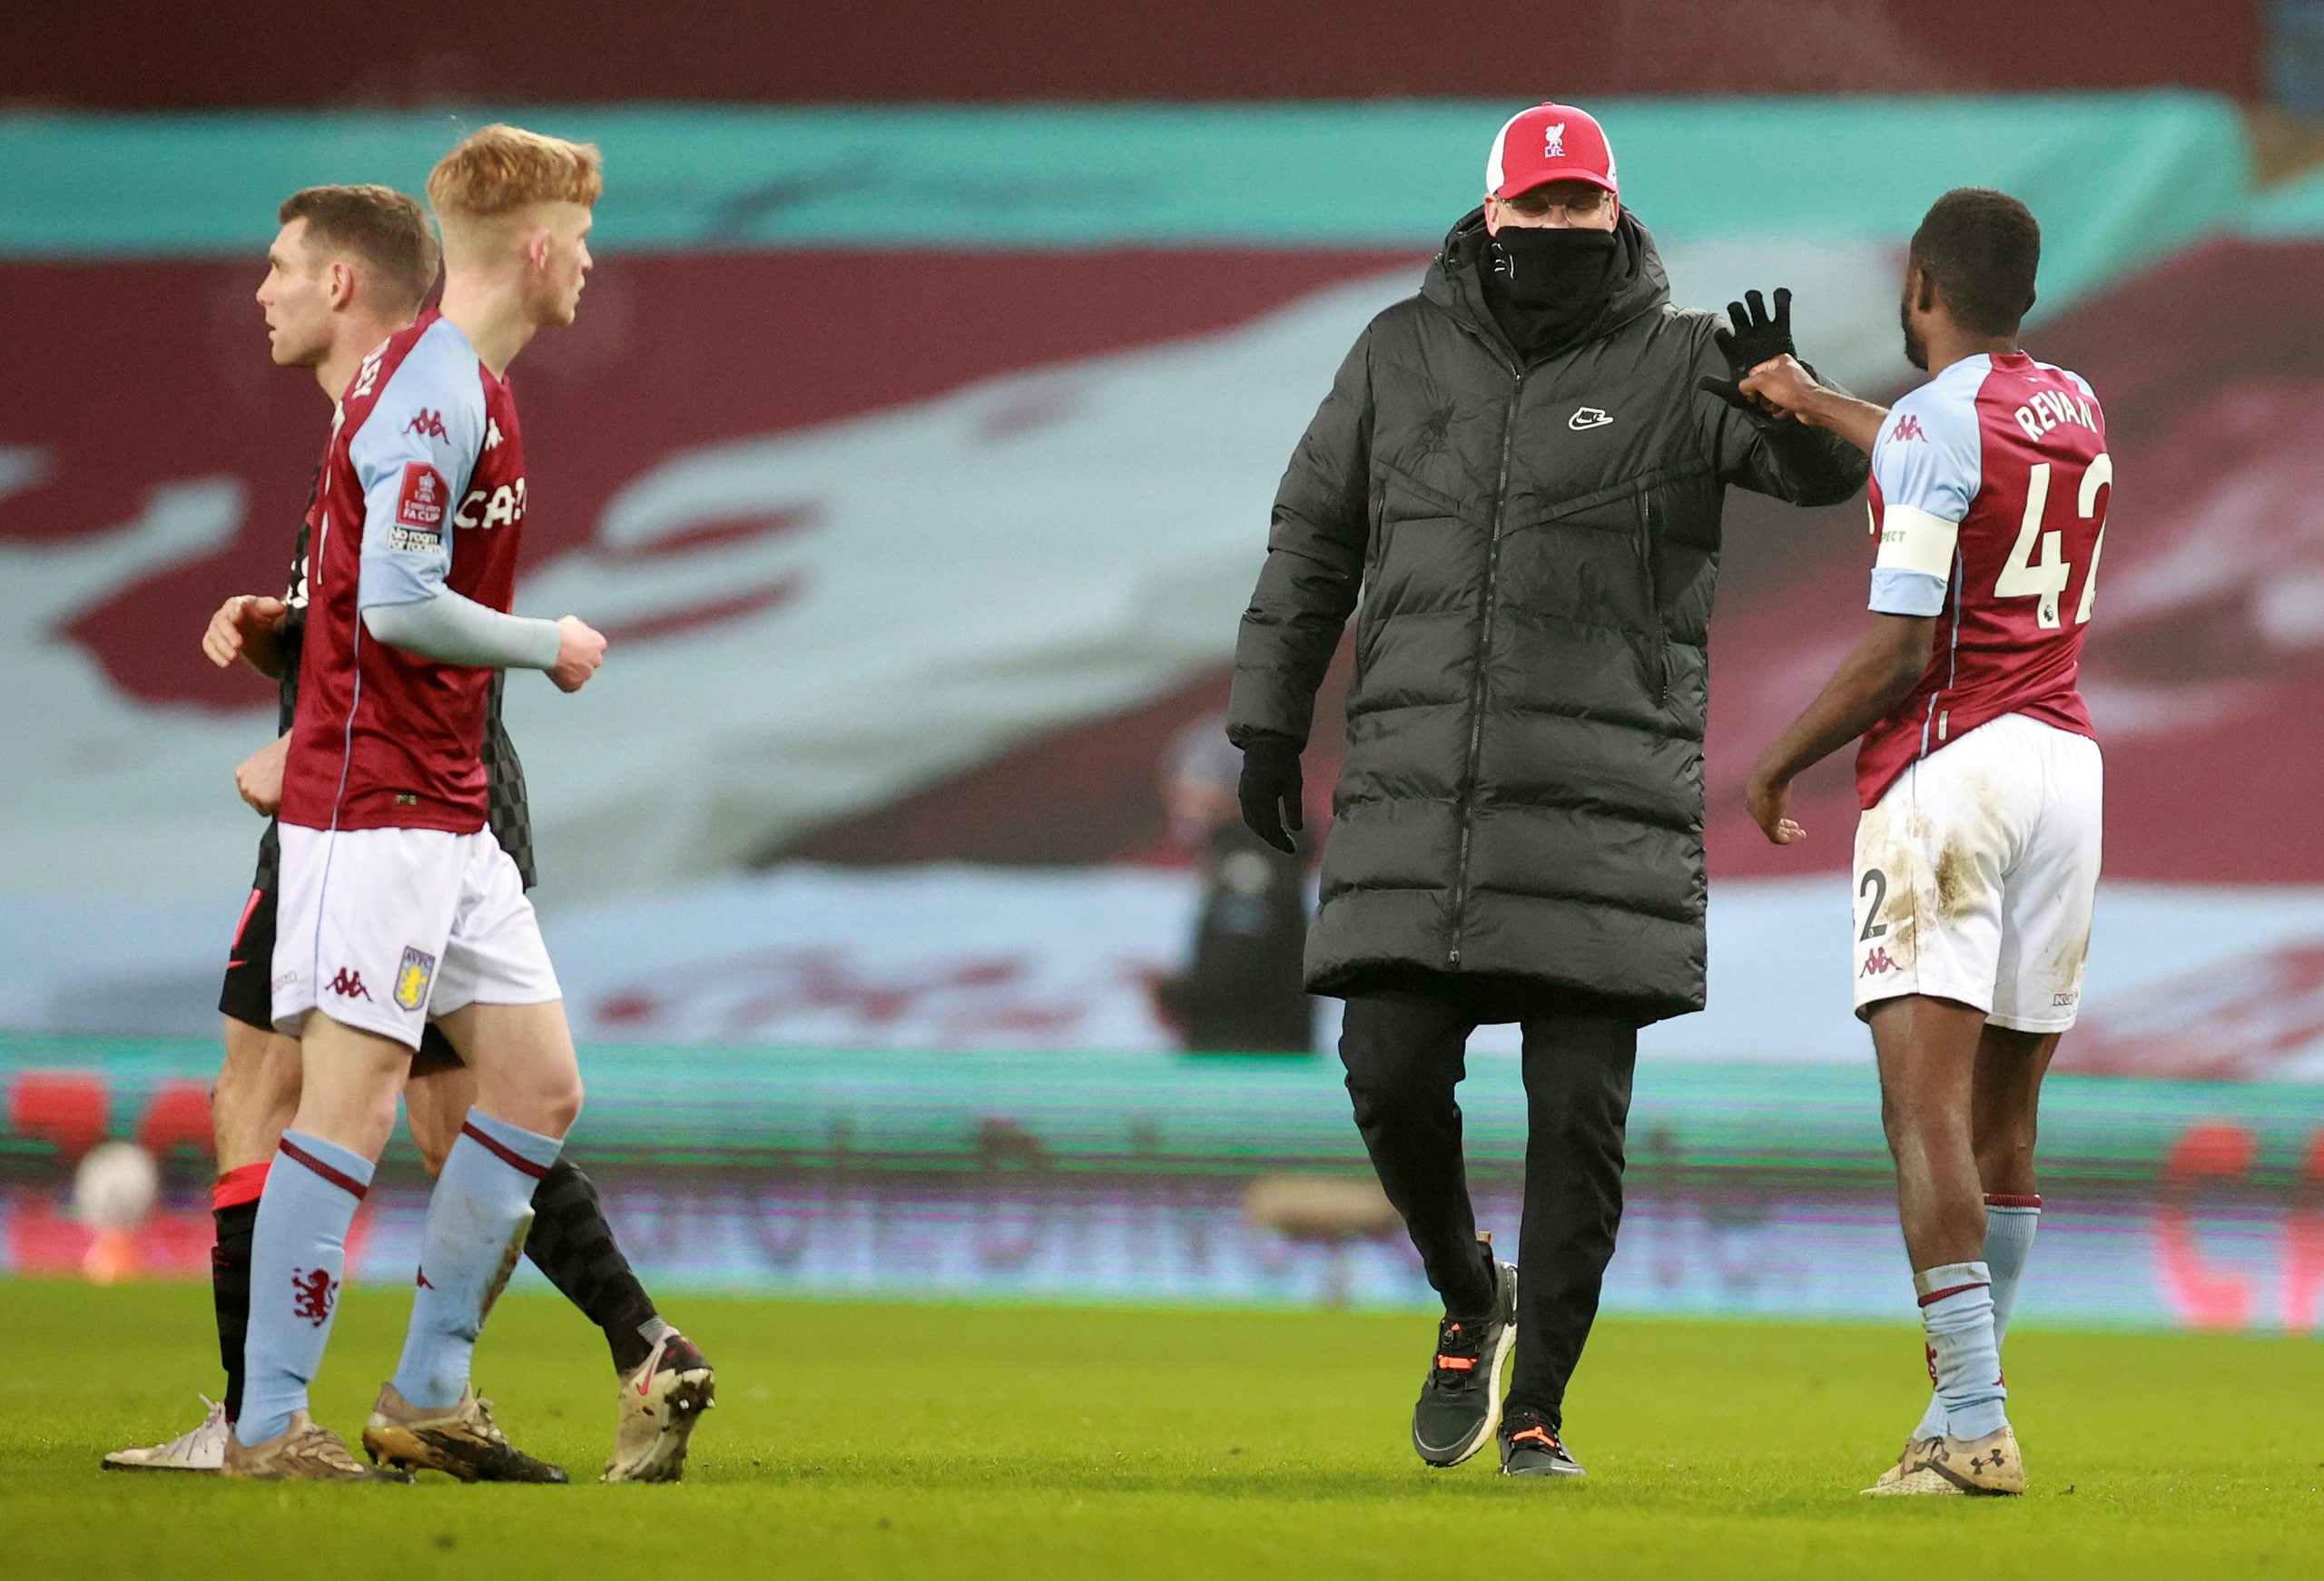 Liverpool's German manager Jurgen Klopp (2R) congratulates Aston Villa's English defender Dominic Revan (R) after the English FA Cup third round football match between Aston Villa and Liverpool at Villa Park in Birmingham, central England on January 8, 2021. - Liverpool won the match 4-1. (Photo by HANNAH MCKAY / POOL / AFP) / RESTRICTED TO EDITORIAL USE. No use with unauthorized audio, video, data, fixture lists, club/league logos or 'live' services. Online in-match use limited to 120 images. An additional 40 images may be used in extra time. No video emulation. Social media in-match use limited to 120 images. An additional 40 images may be used in extra time. No use in betting publications, games or single club/league/player publications. /  (Photo by HANNAH MCKAY/POOL/AFP via Getty Images)